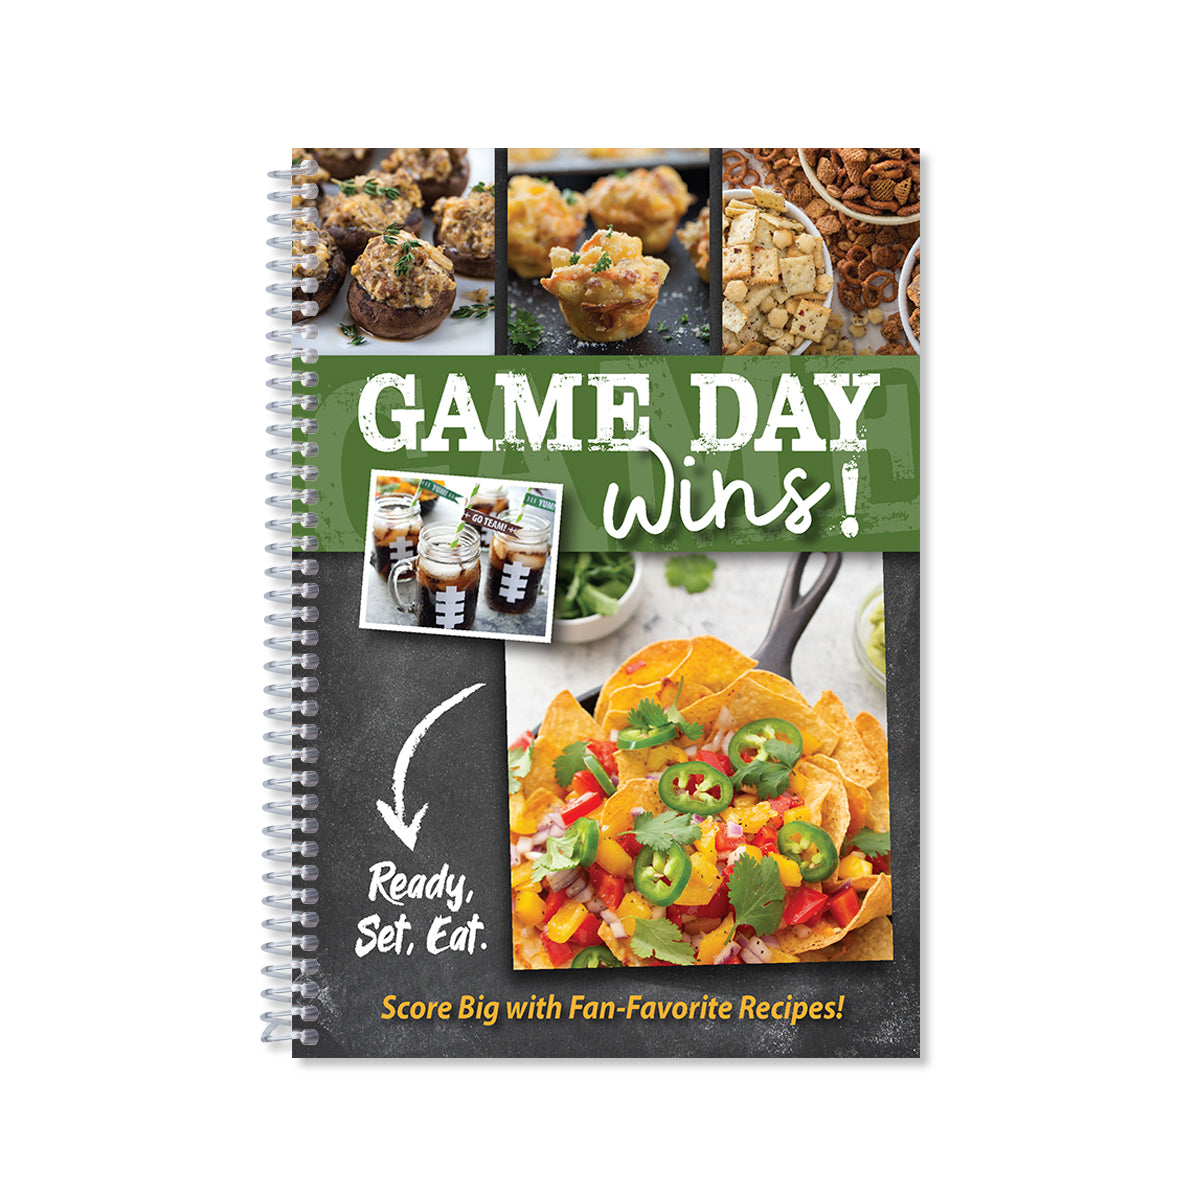 Game Day Wins Cookbook. Ready, Set, Eat.